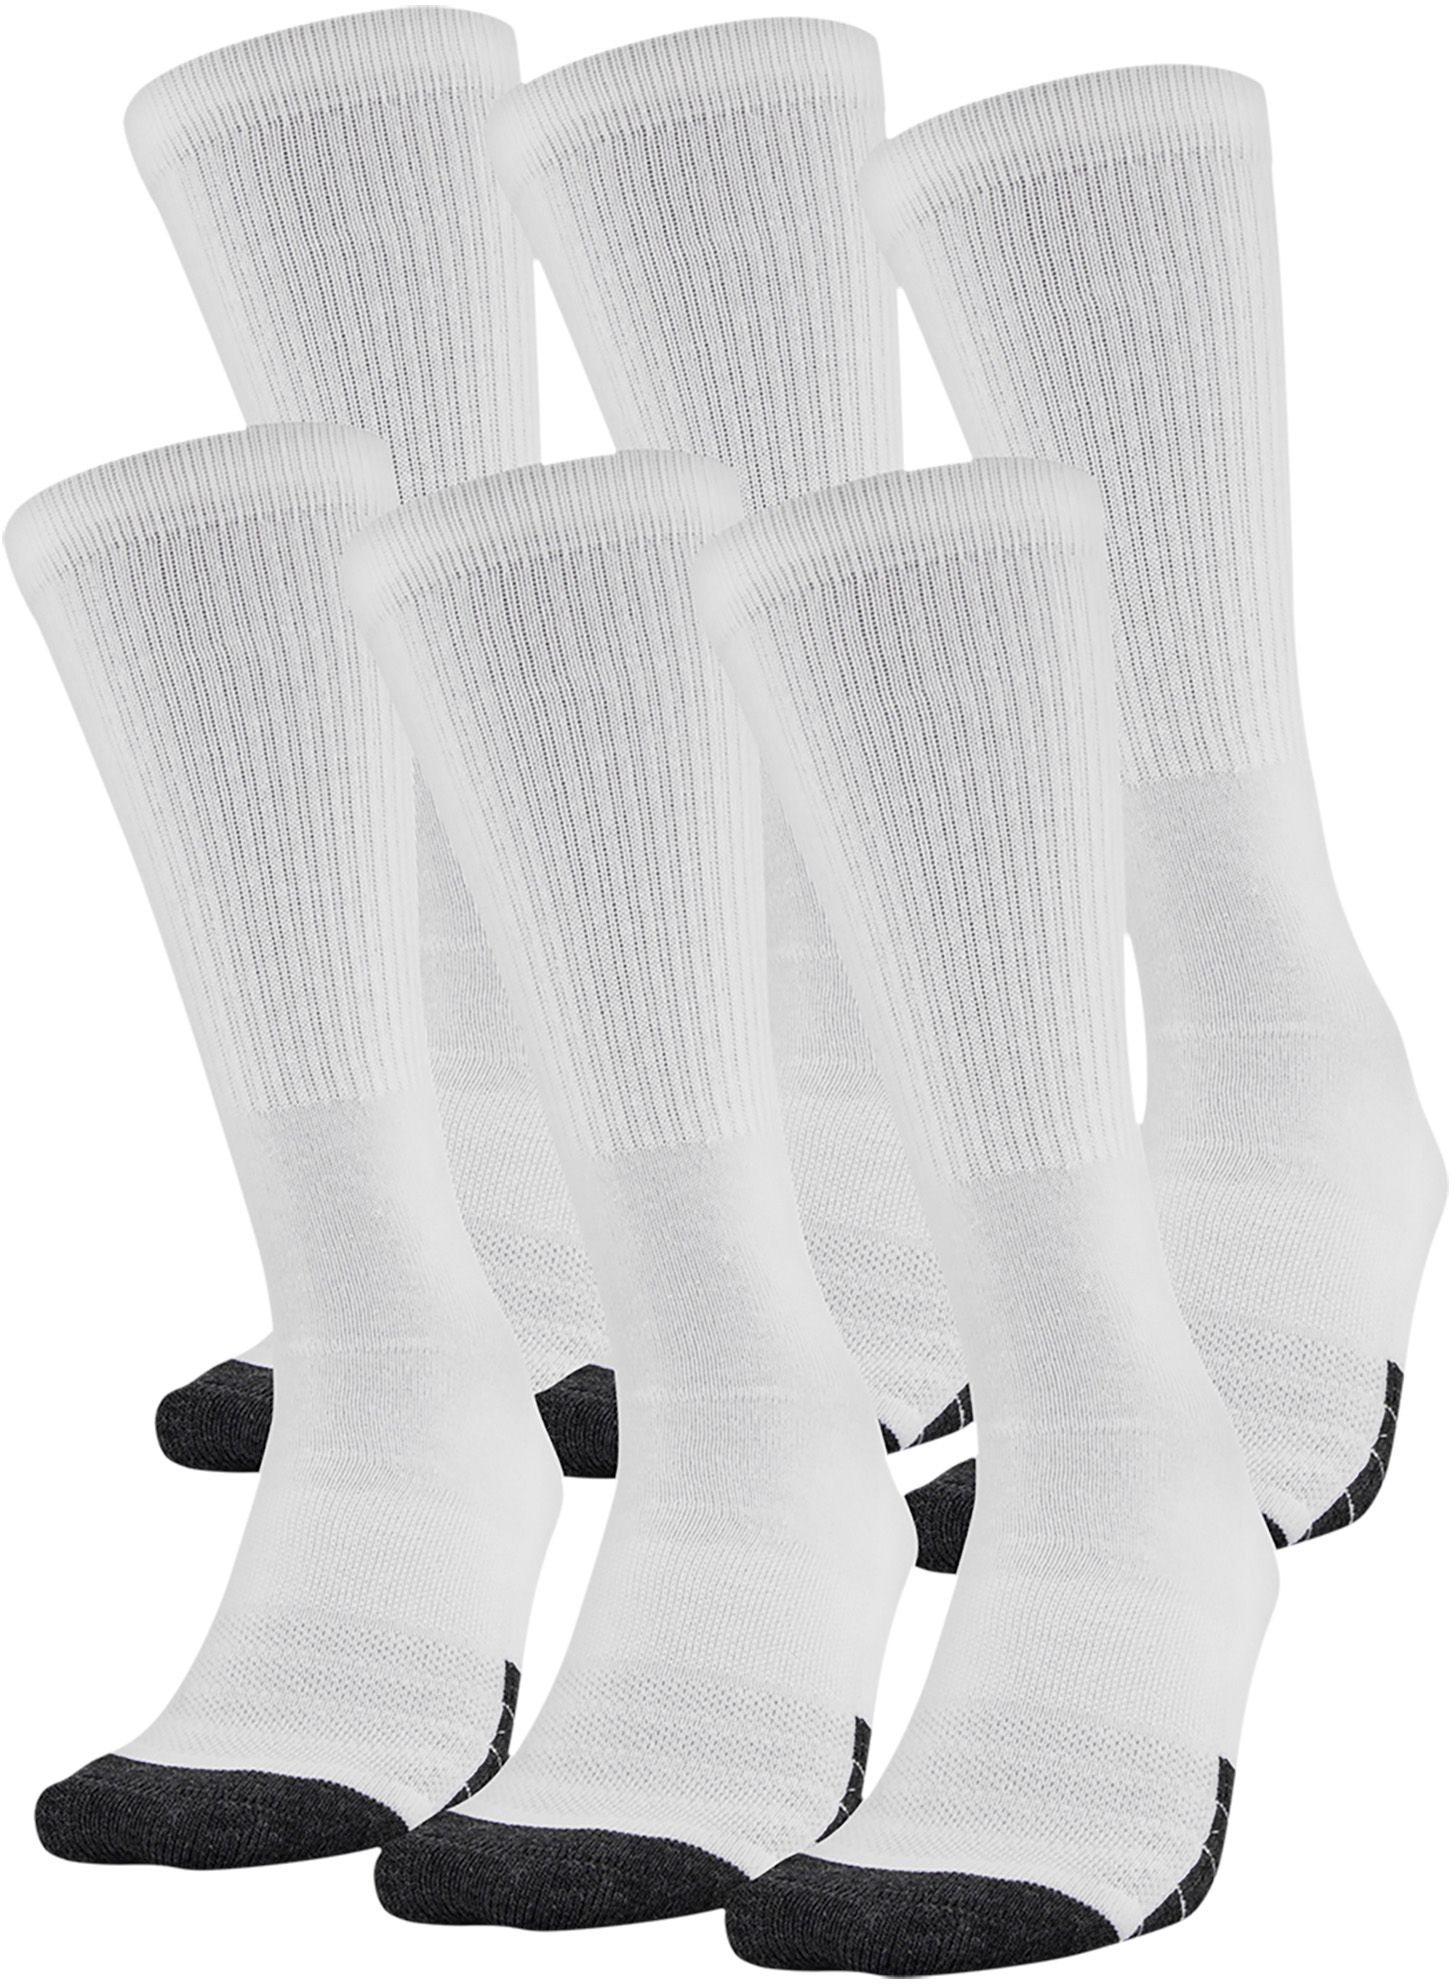 under armour youth crew socks